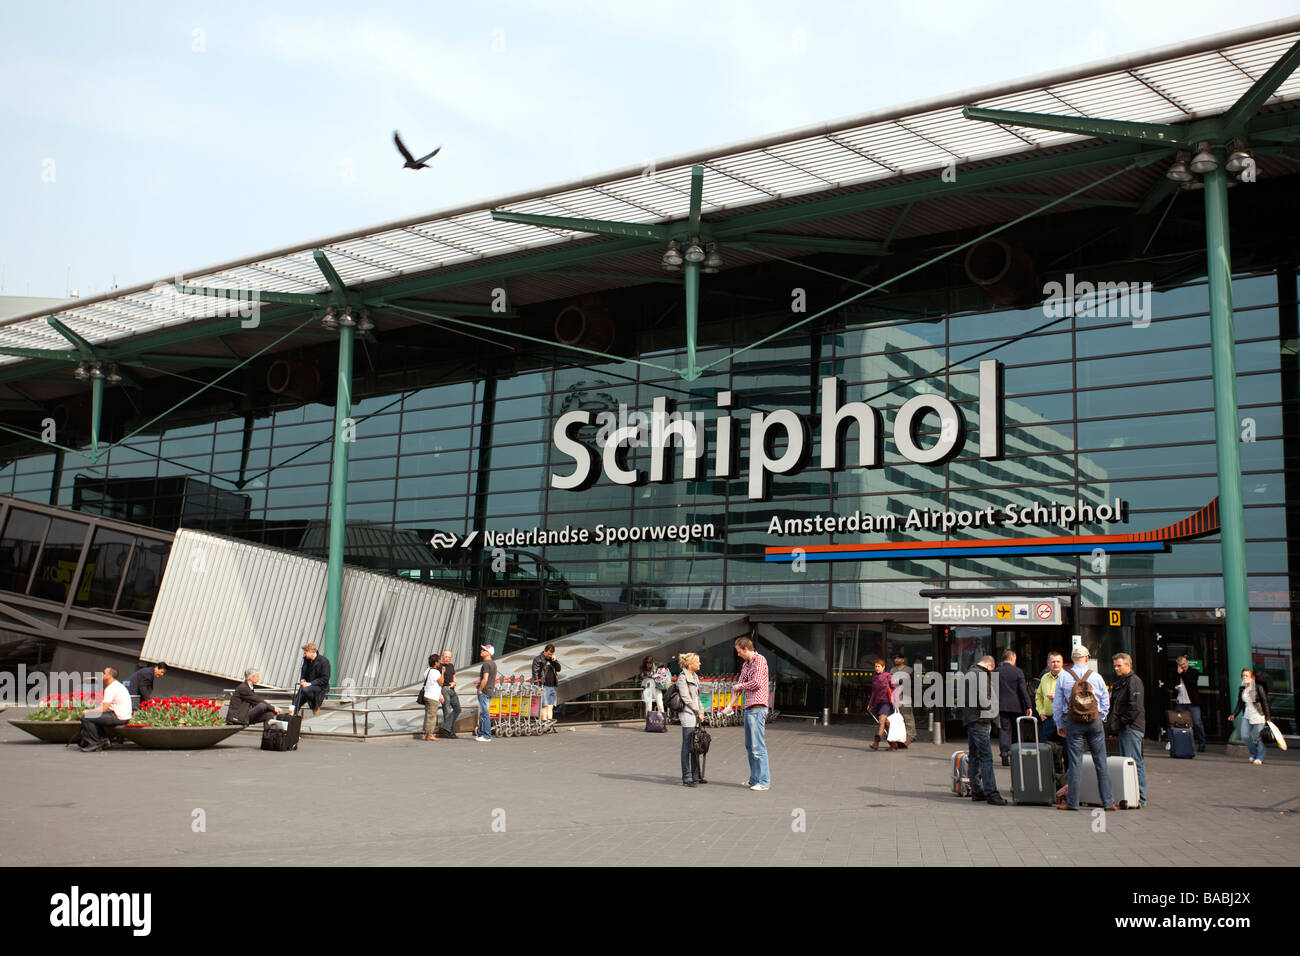 Schiphol's Airport main entrance, Amsterdam, Netherlands. Stock Photo